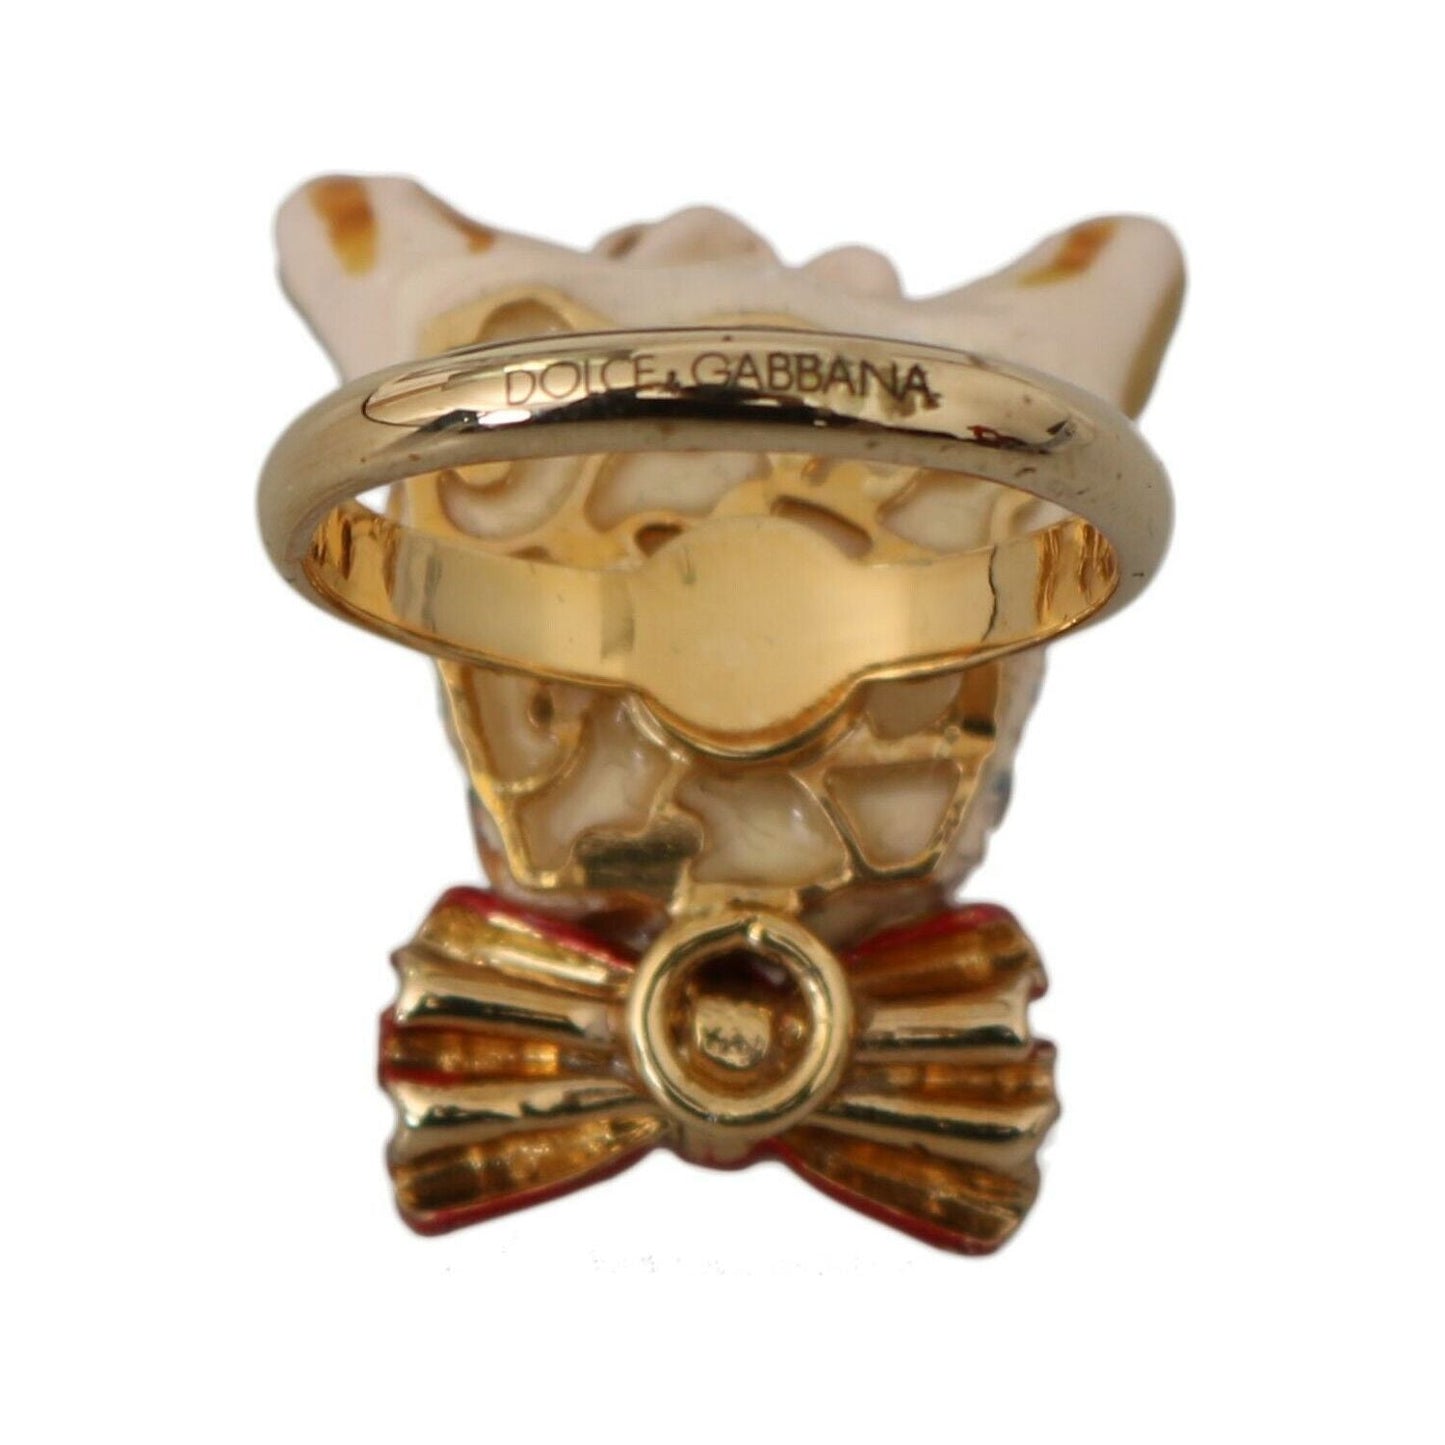 Dolce & Gabbana Elegant Canine-Inspired Gold Tone Ring Ring beige-dog-pet-branded-accessory-gold-brass-resin-ring s-l1600-2022-10-06T123621.391-bf3551a6-c47.jpg